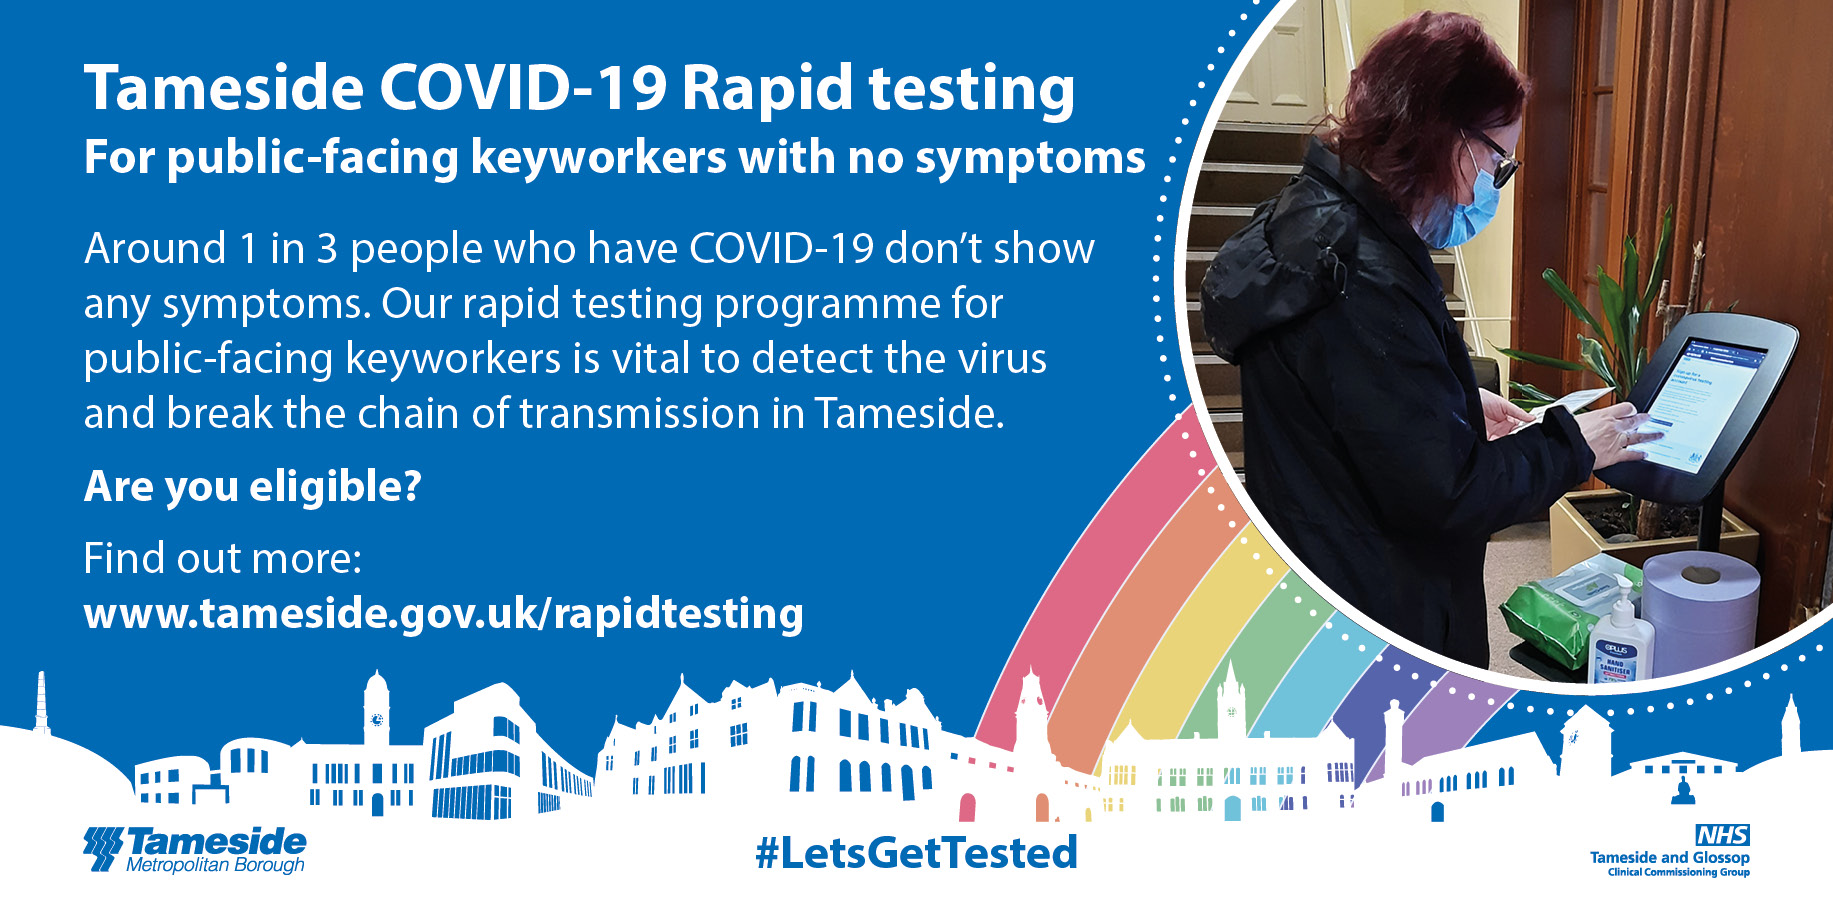 Tameside COVID-19 Rapid testing Are you eligible?